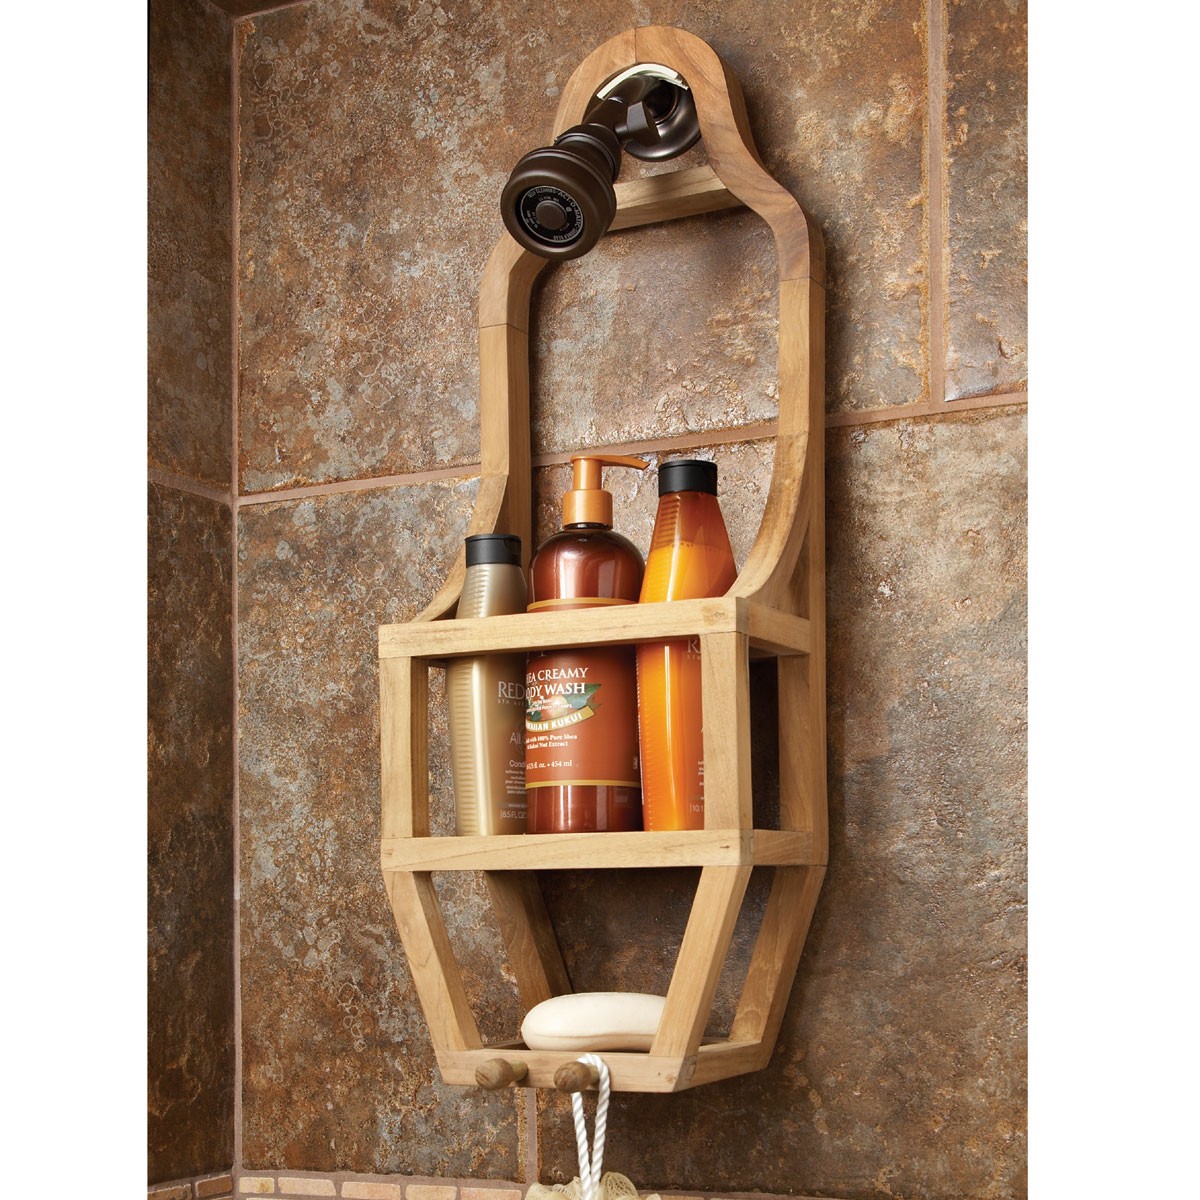 How to make teak shower caddy homes by ottoman homes